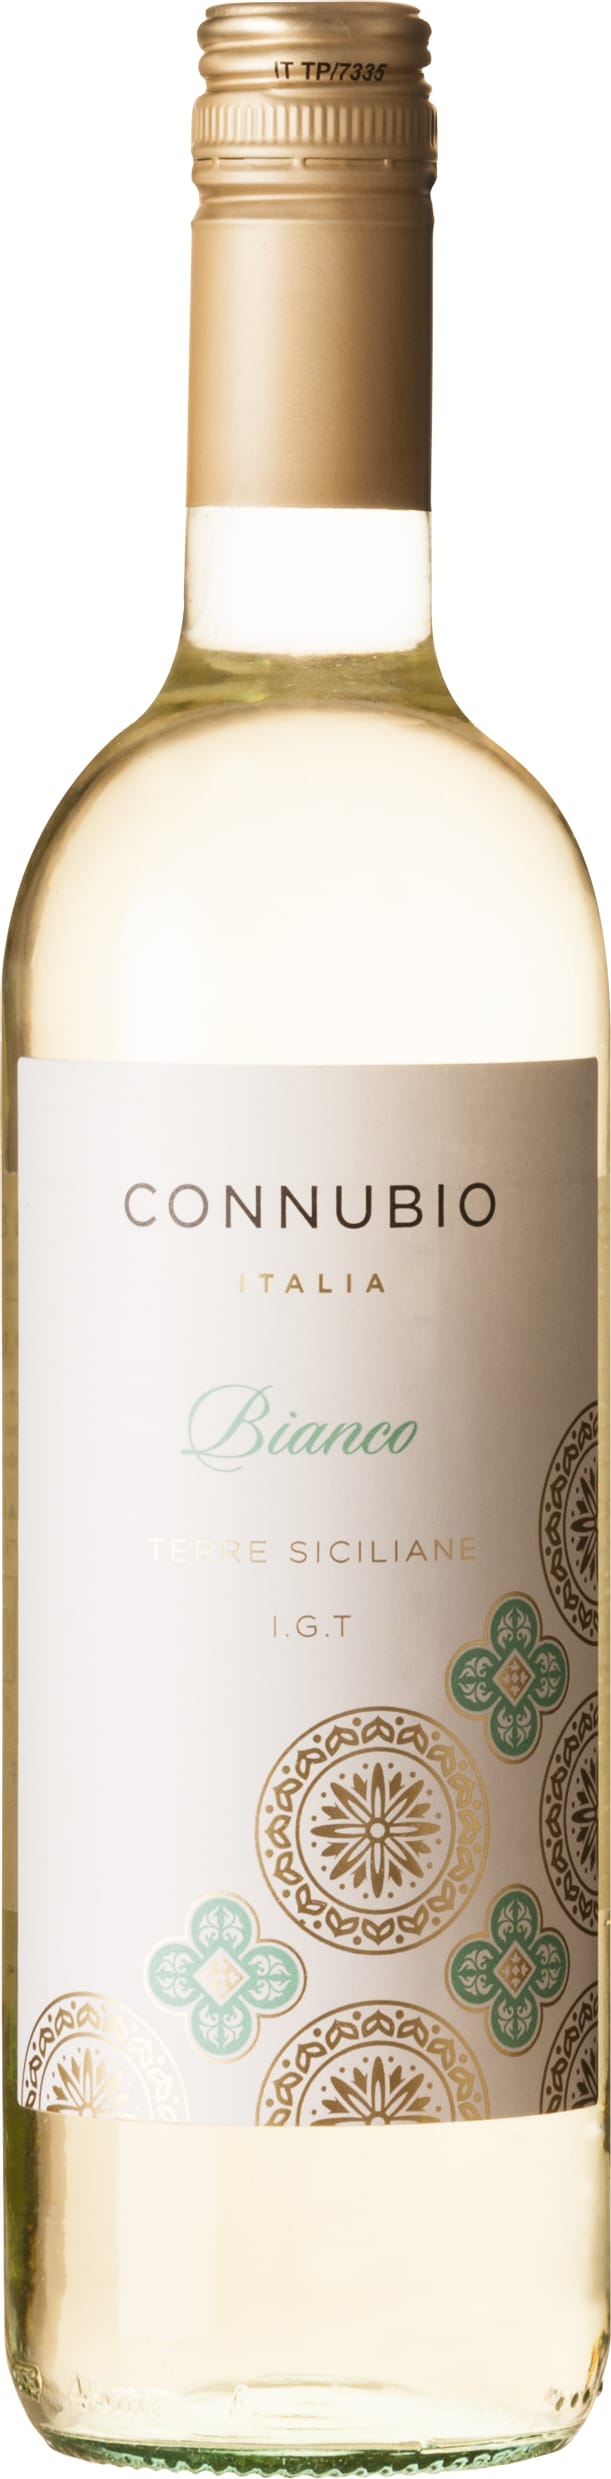 Connubio Bianco Magnum 2020 150cl - Buy Connubio Wines from GREAT WINES DIRECT wine shop